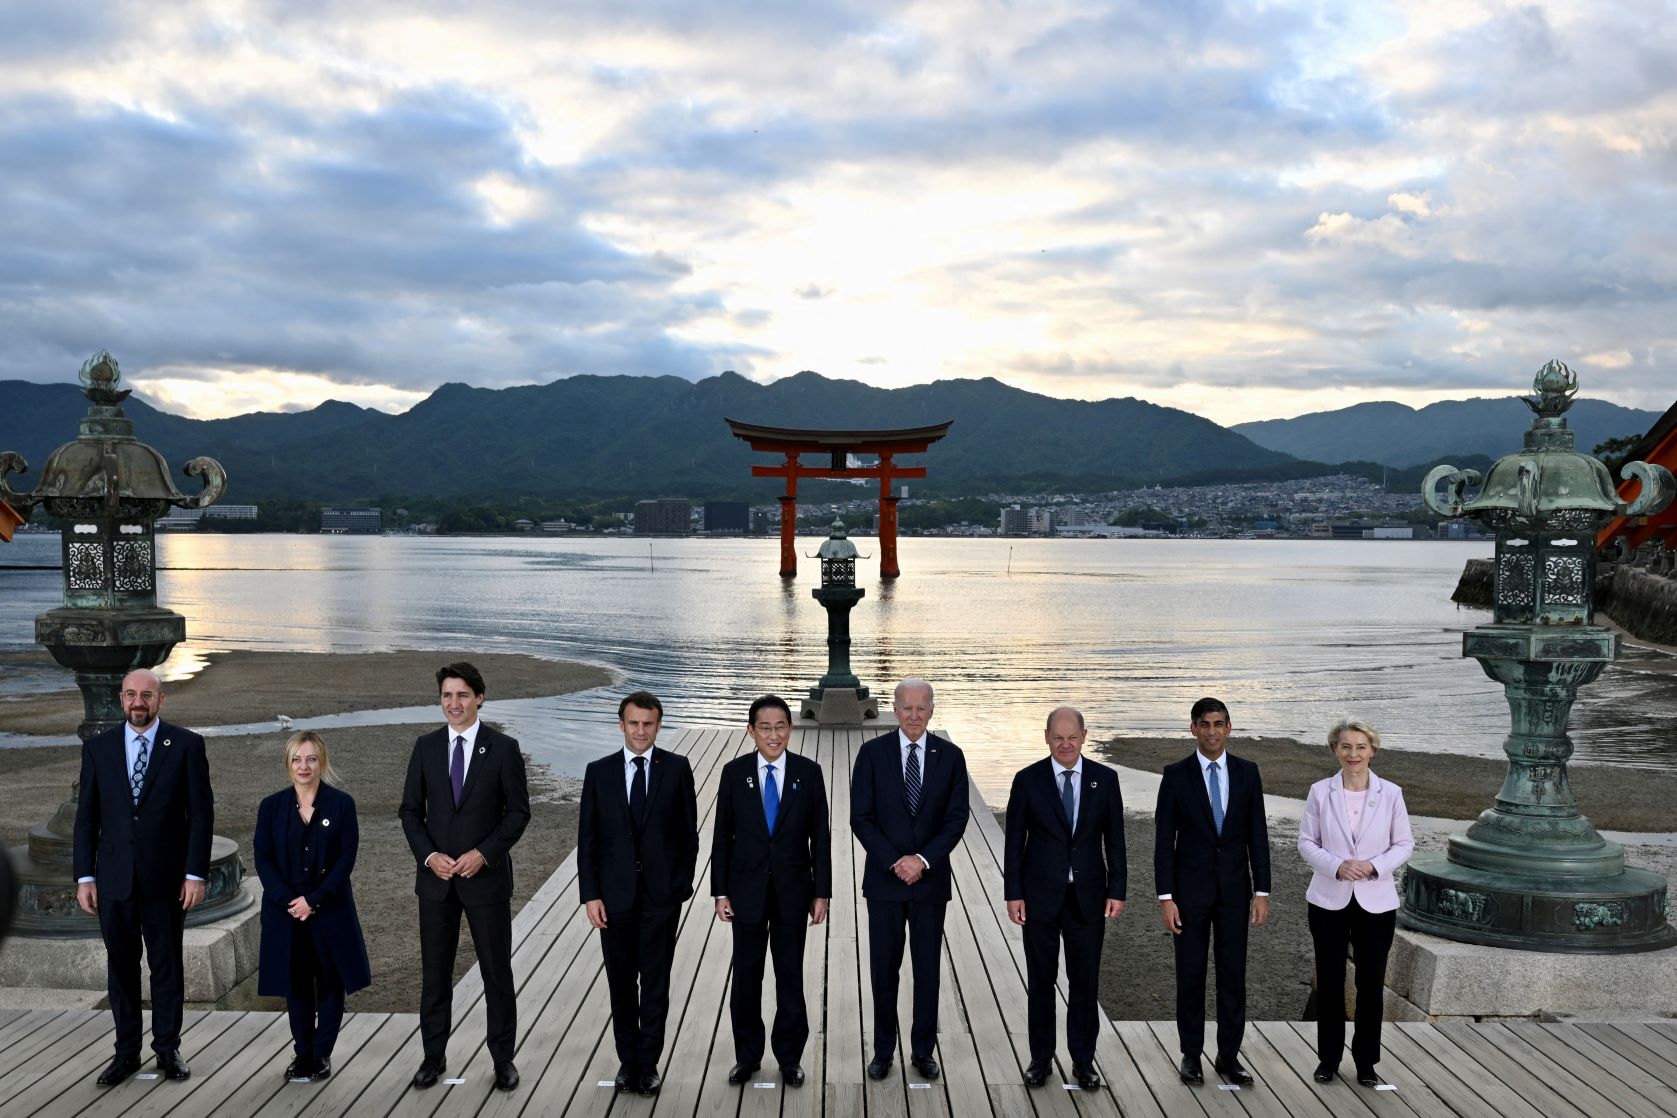 G7 leaders visit the Itsukushima Shrine, which is in the middle of a lake with sunlight reflecting off the water, on Miyajima Island in Hatsukaichi, Japan on Friday, May 19, 2023. Kenny Holston/Pool via REUTERS